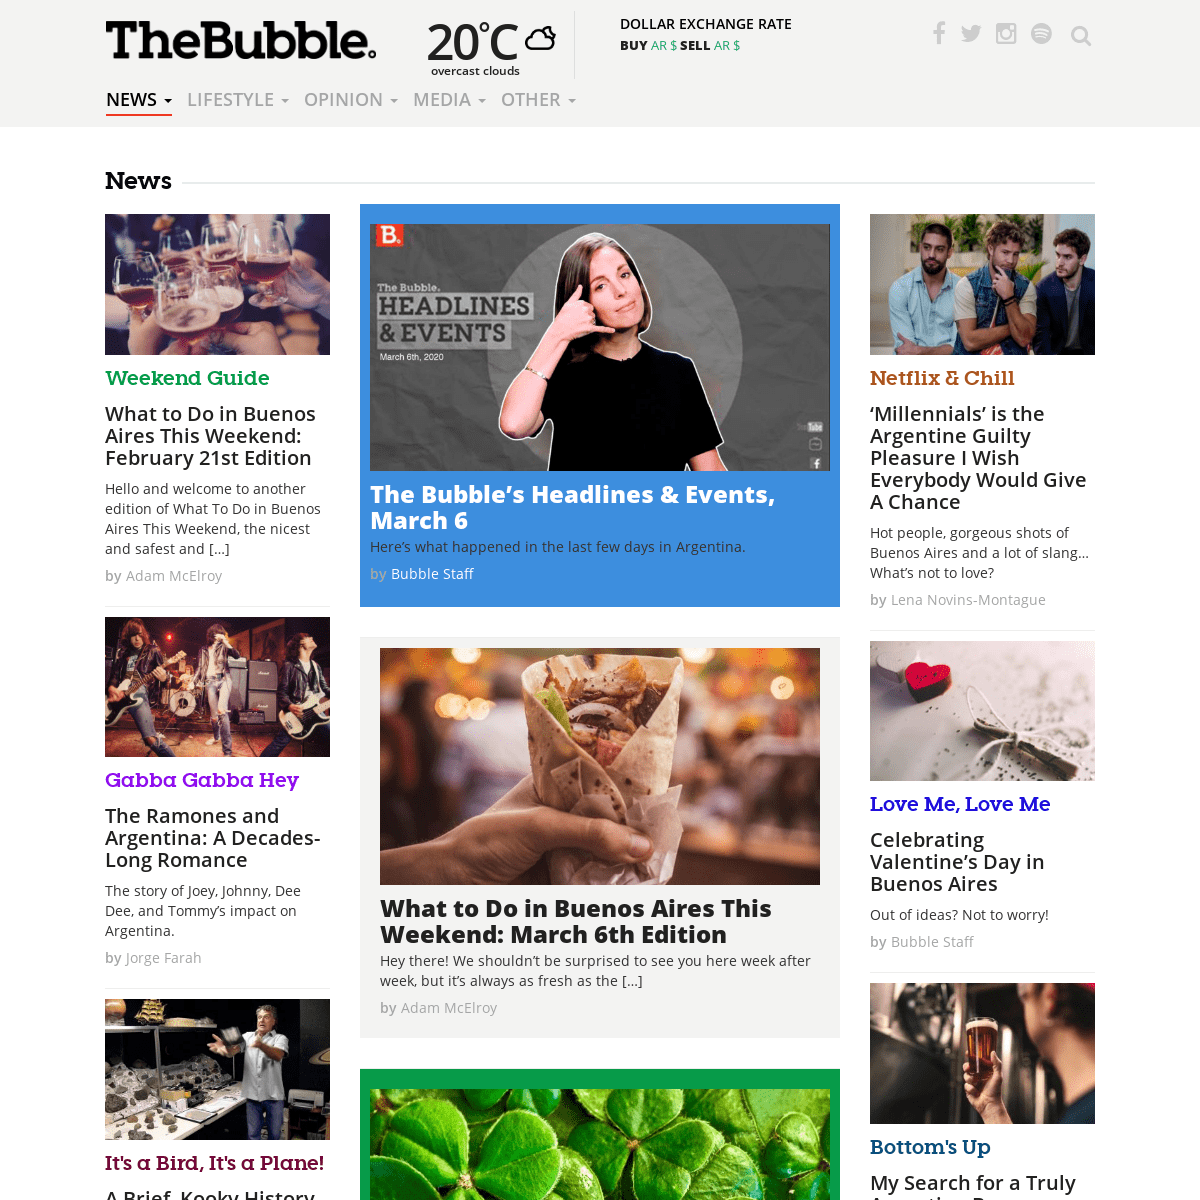 A complete backup of thebubble.com